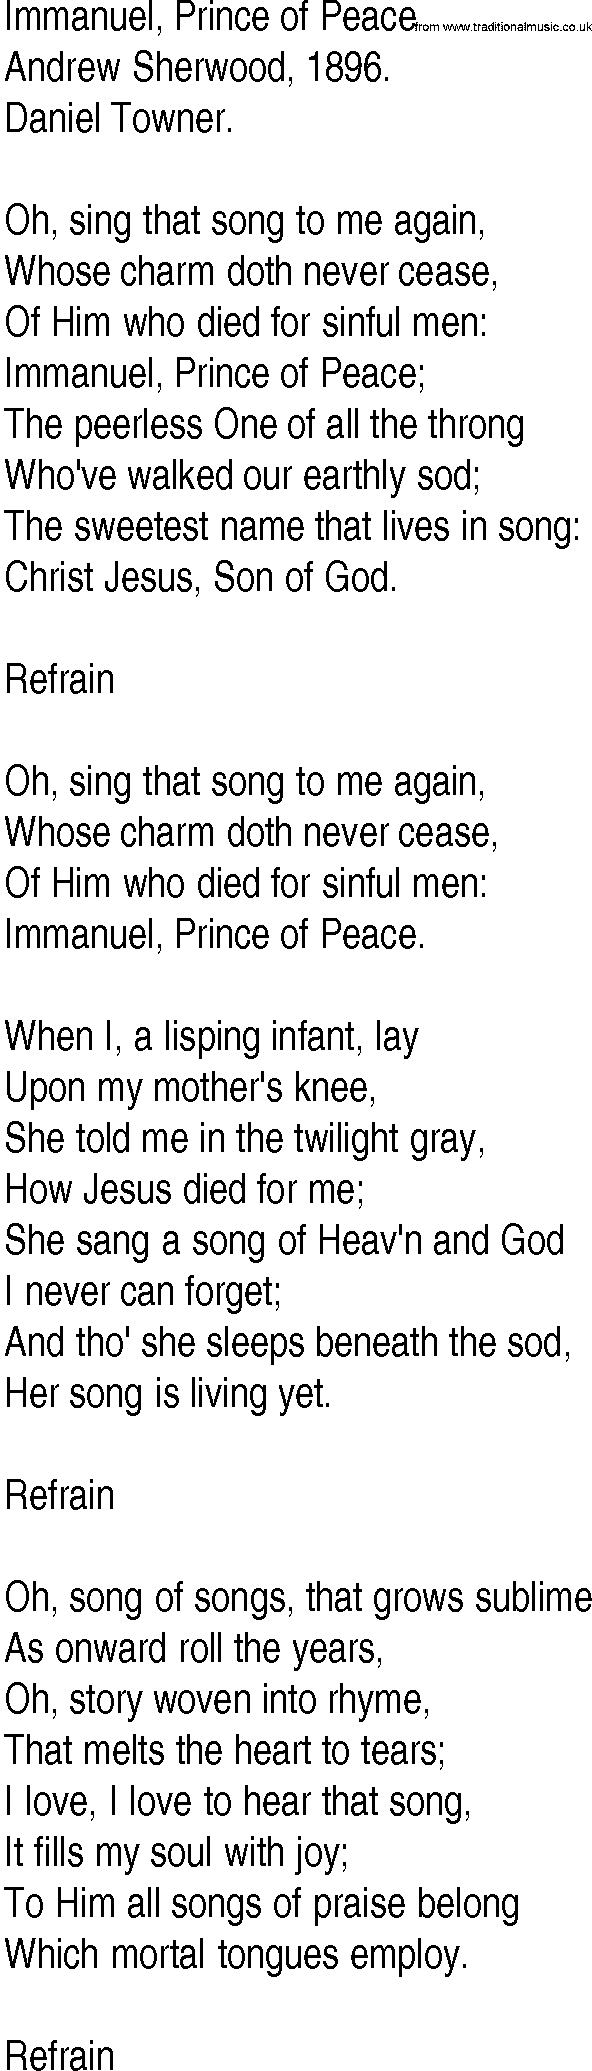 Hymn and Gospel Song: Immanuel, Prince of Peace by Andrew Sherwood lyrics